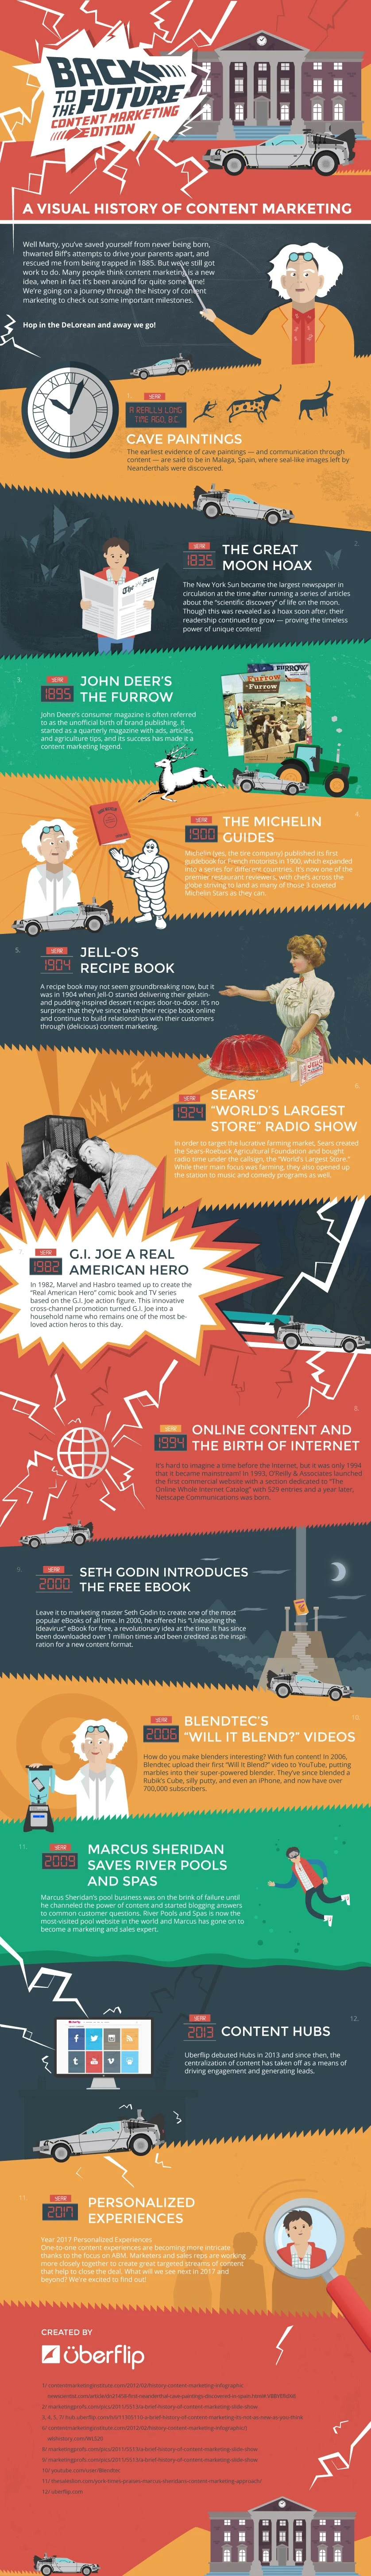 A Visual History of Content Marketing #Infographic